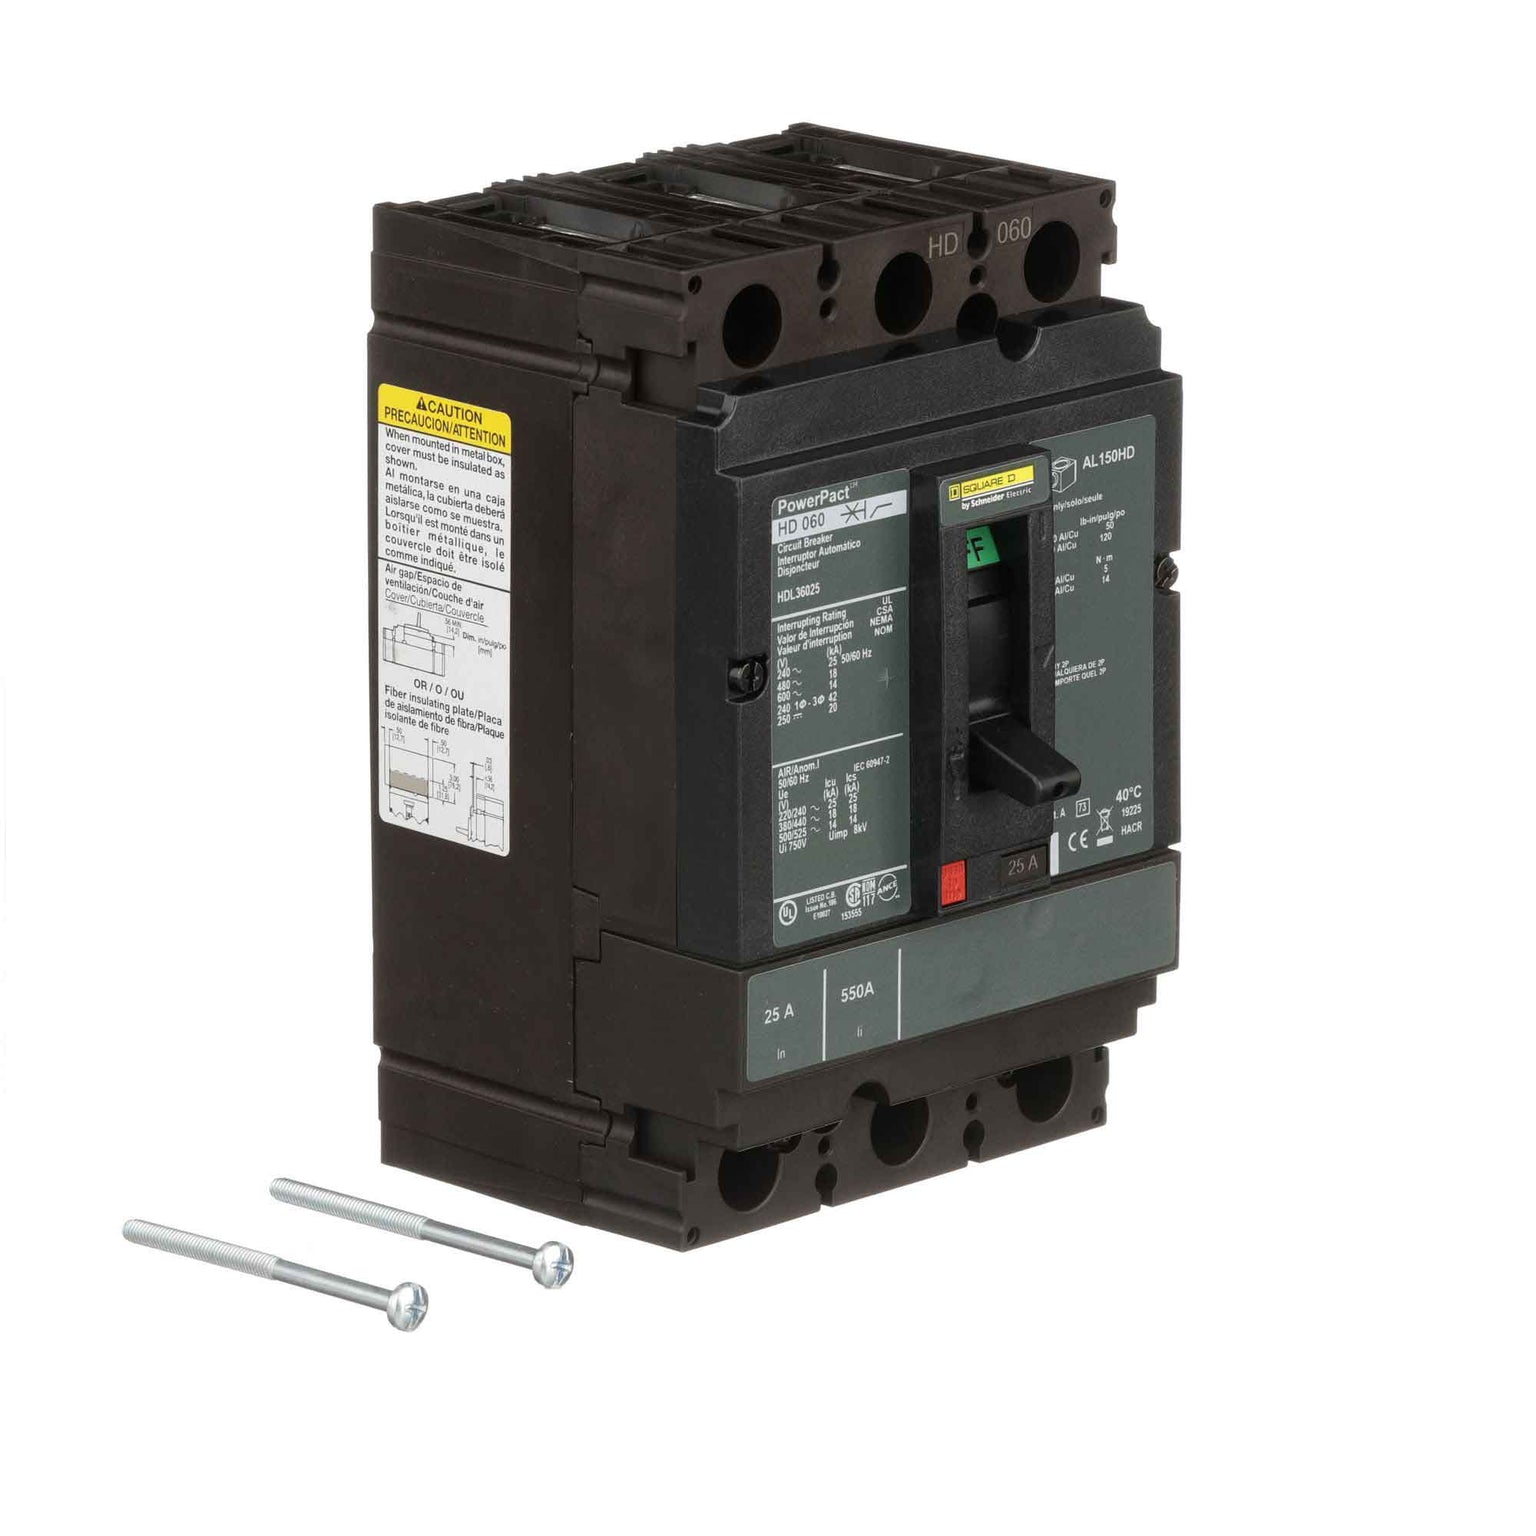 HDL36025 - Square D - Molded Case Circuit Breakers